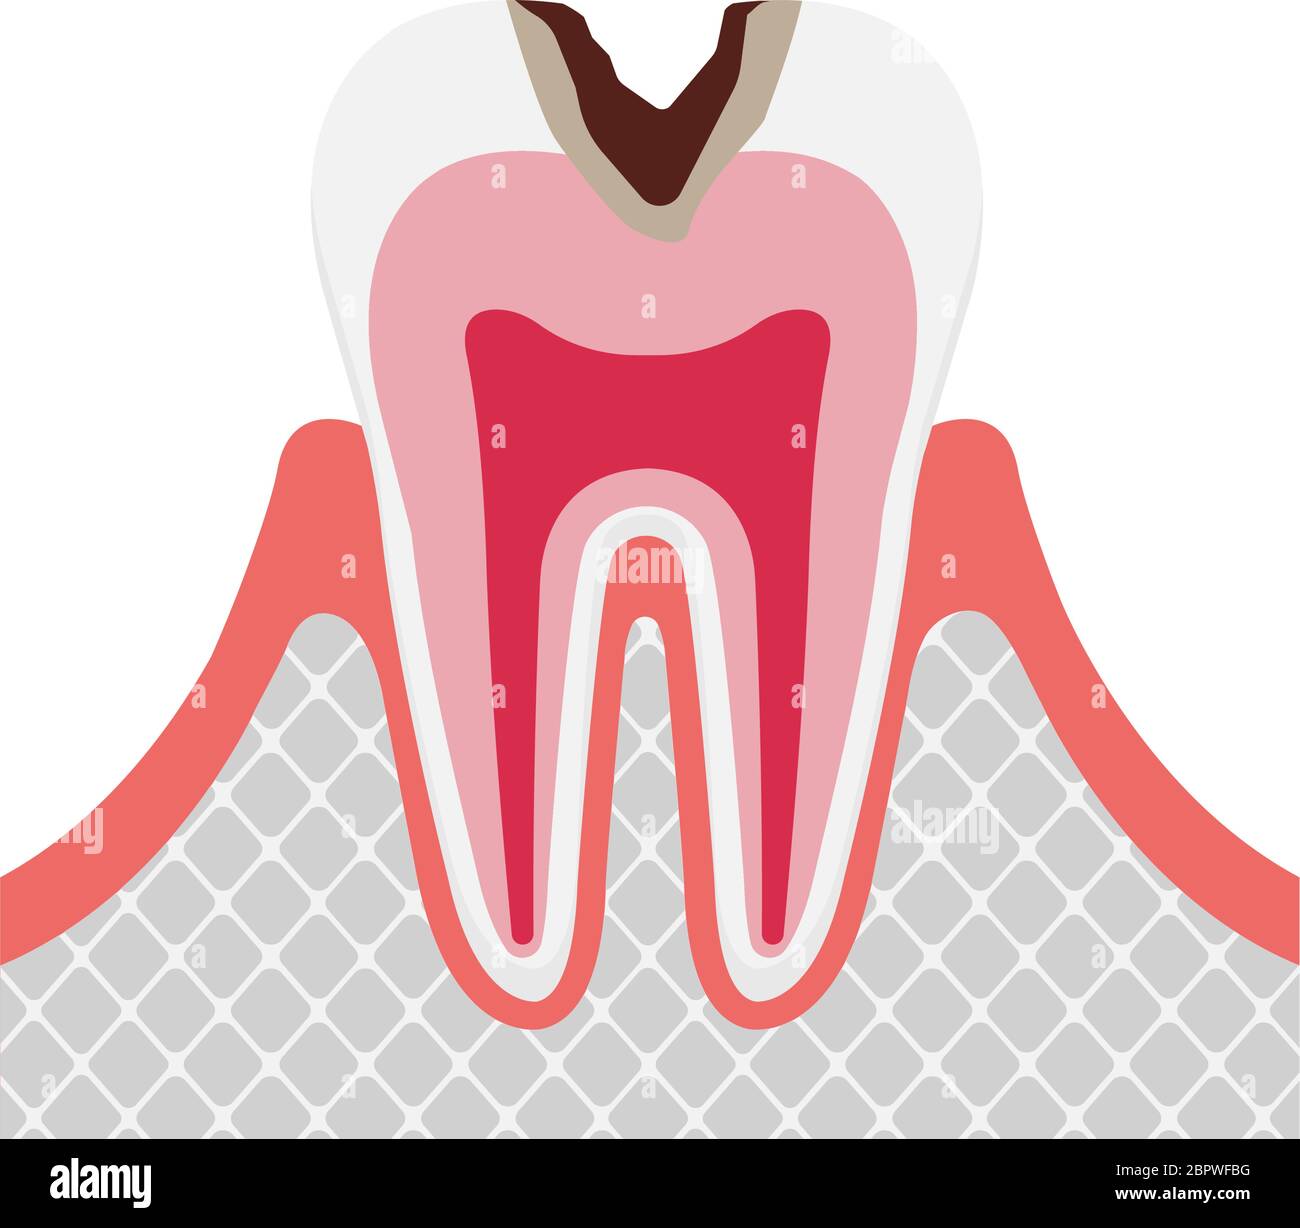 The stage of tooth decay / Decay in dentin Stock Vector